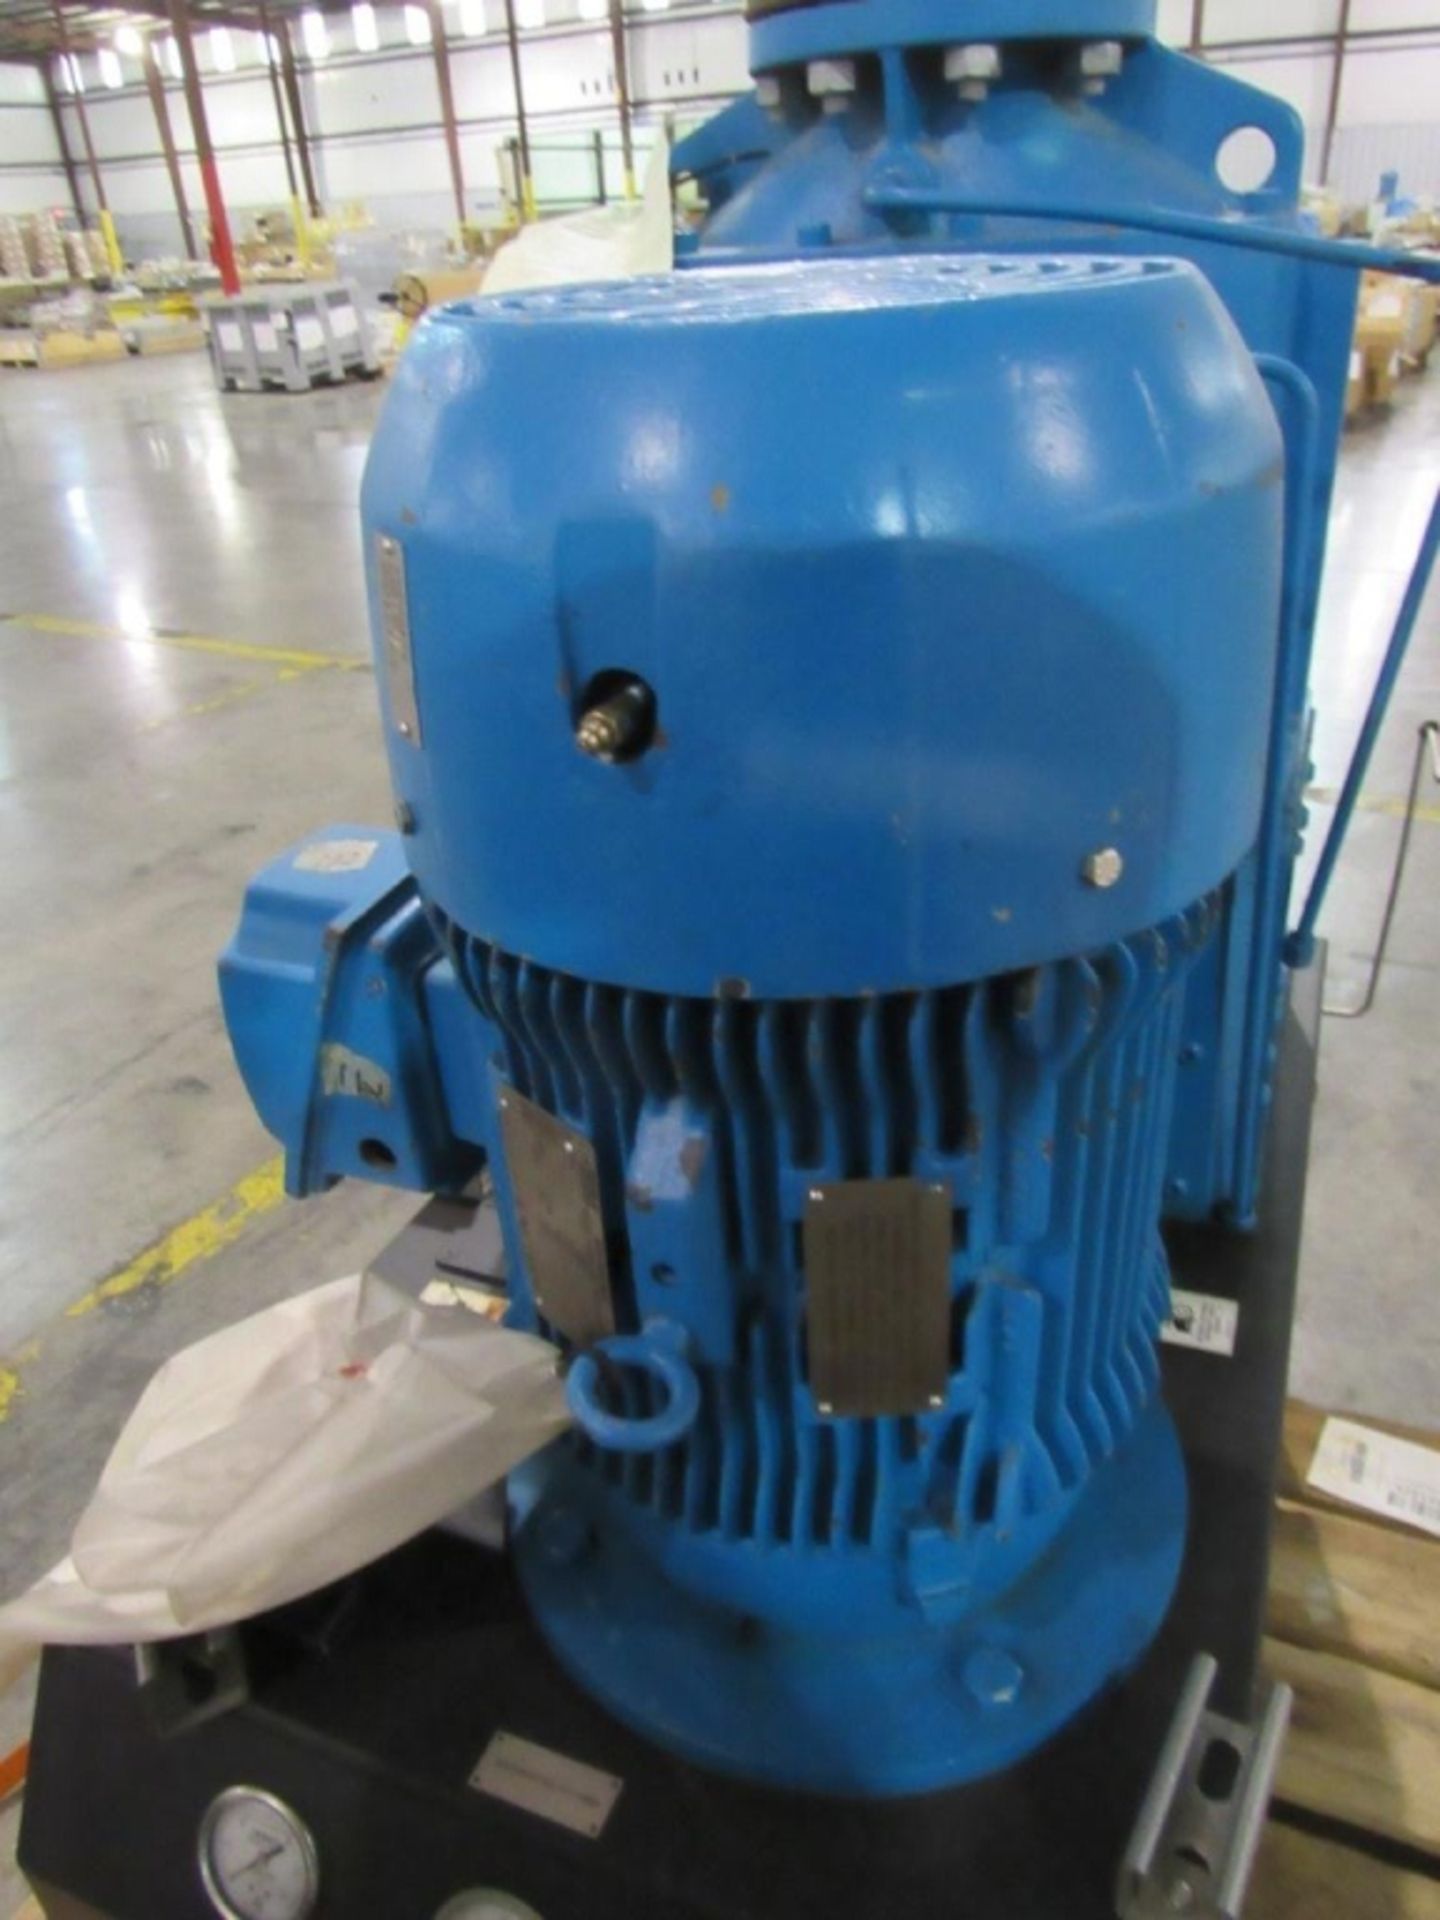 Tuthill KDS 425 Screw Vacuum Pump- ***Located in Cleveland, TN*** MFR - Tuthill Model - KDS 425 - Image 7 of 8